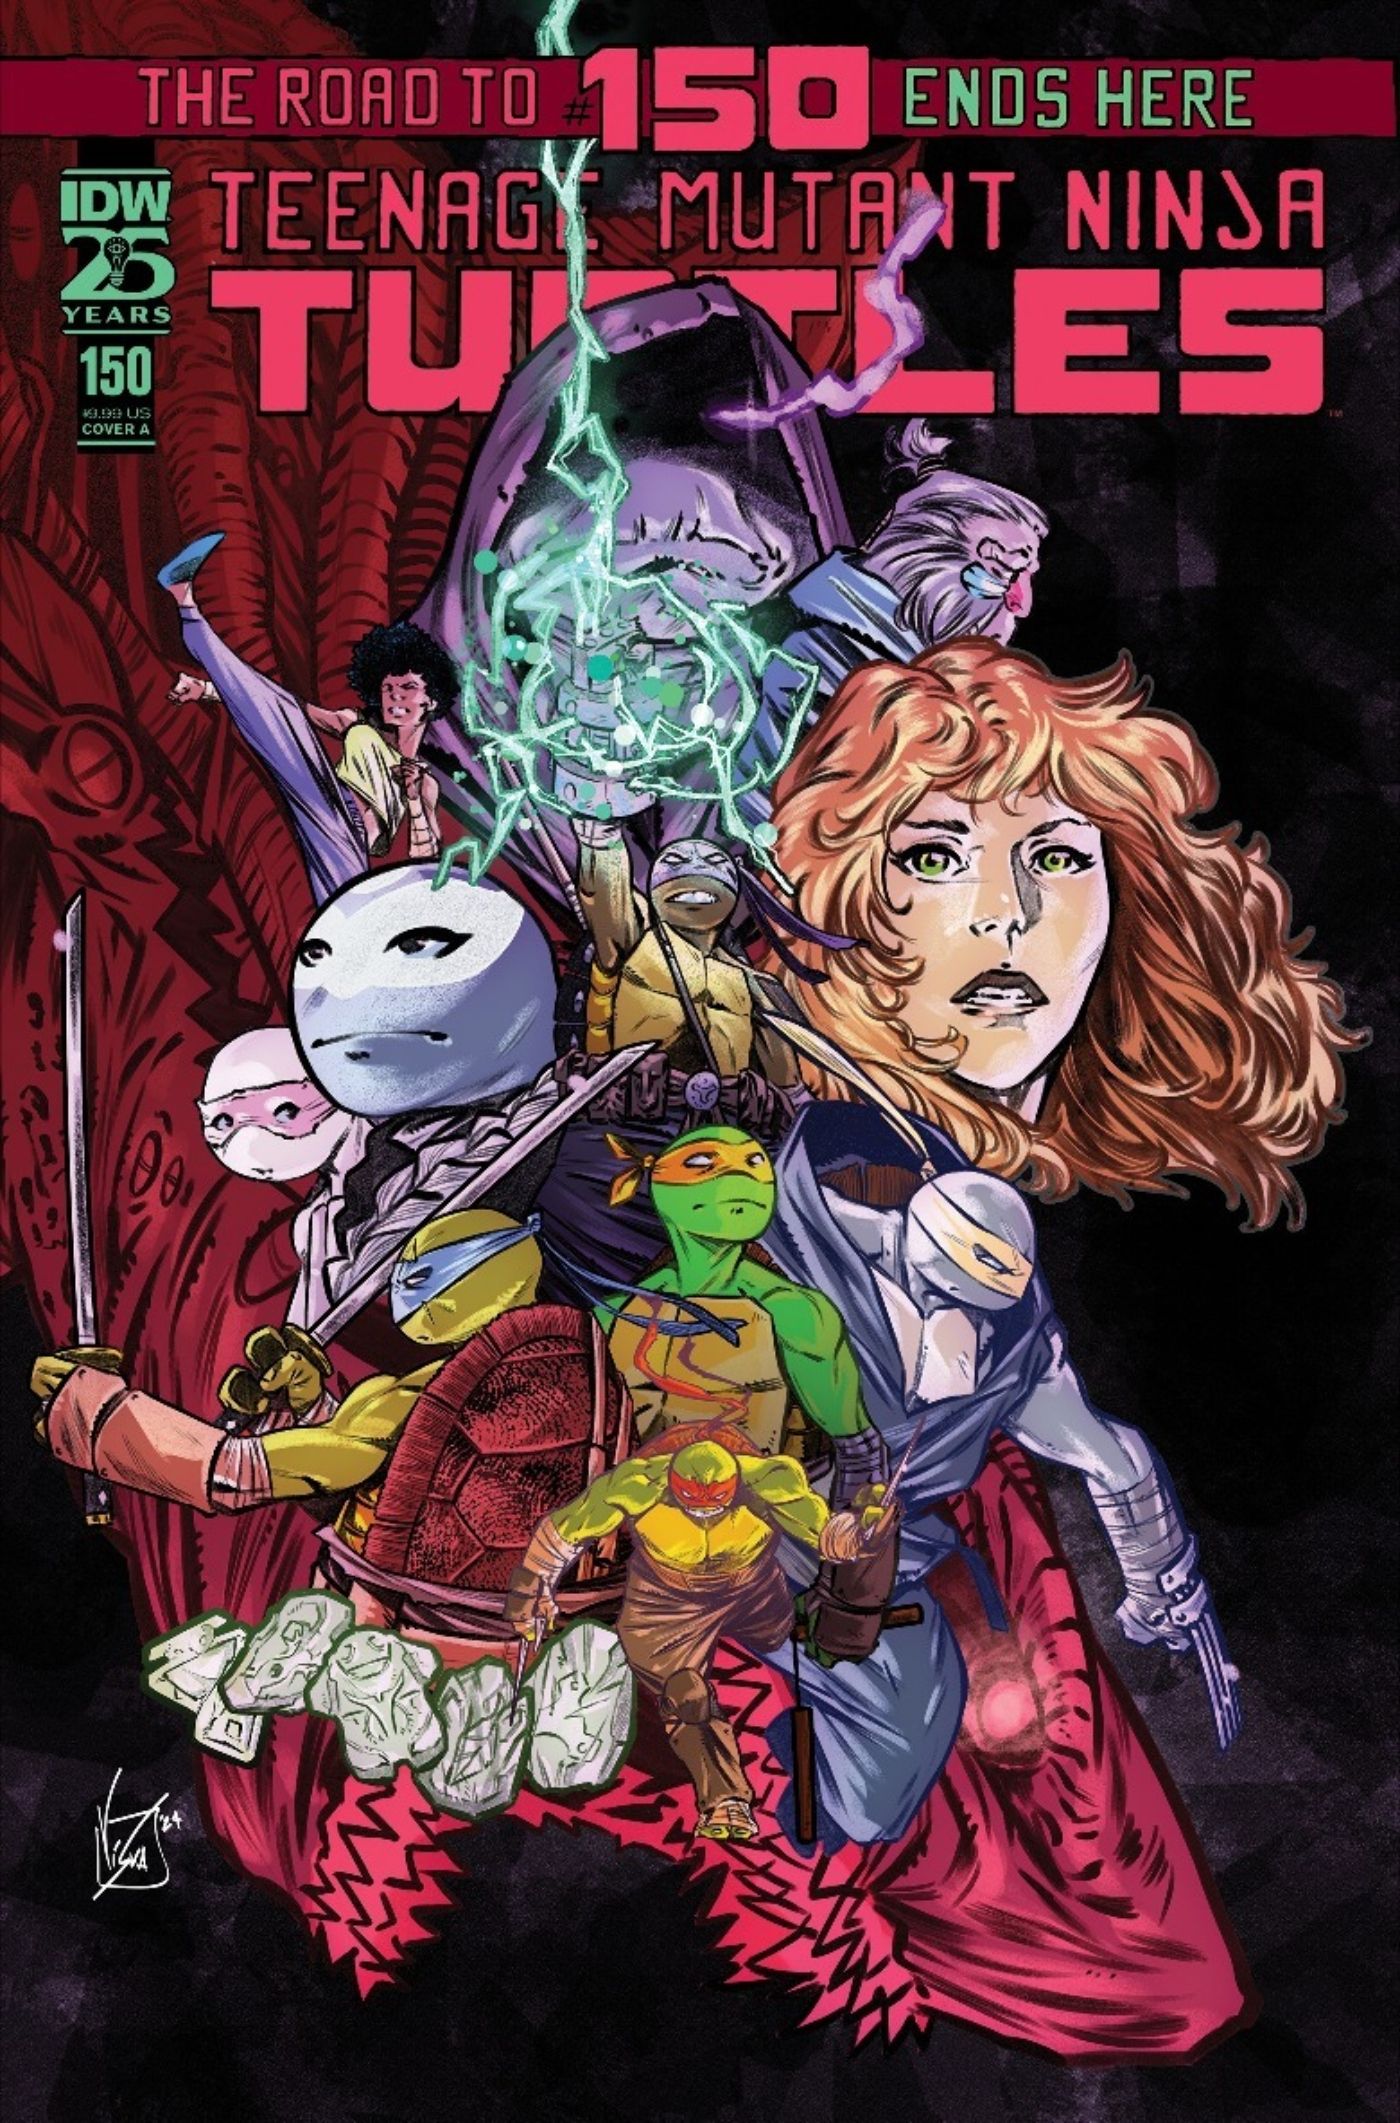 TMNT #150 cover art featuring every major TMNT character.